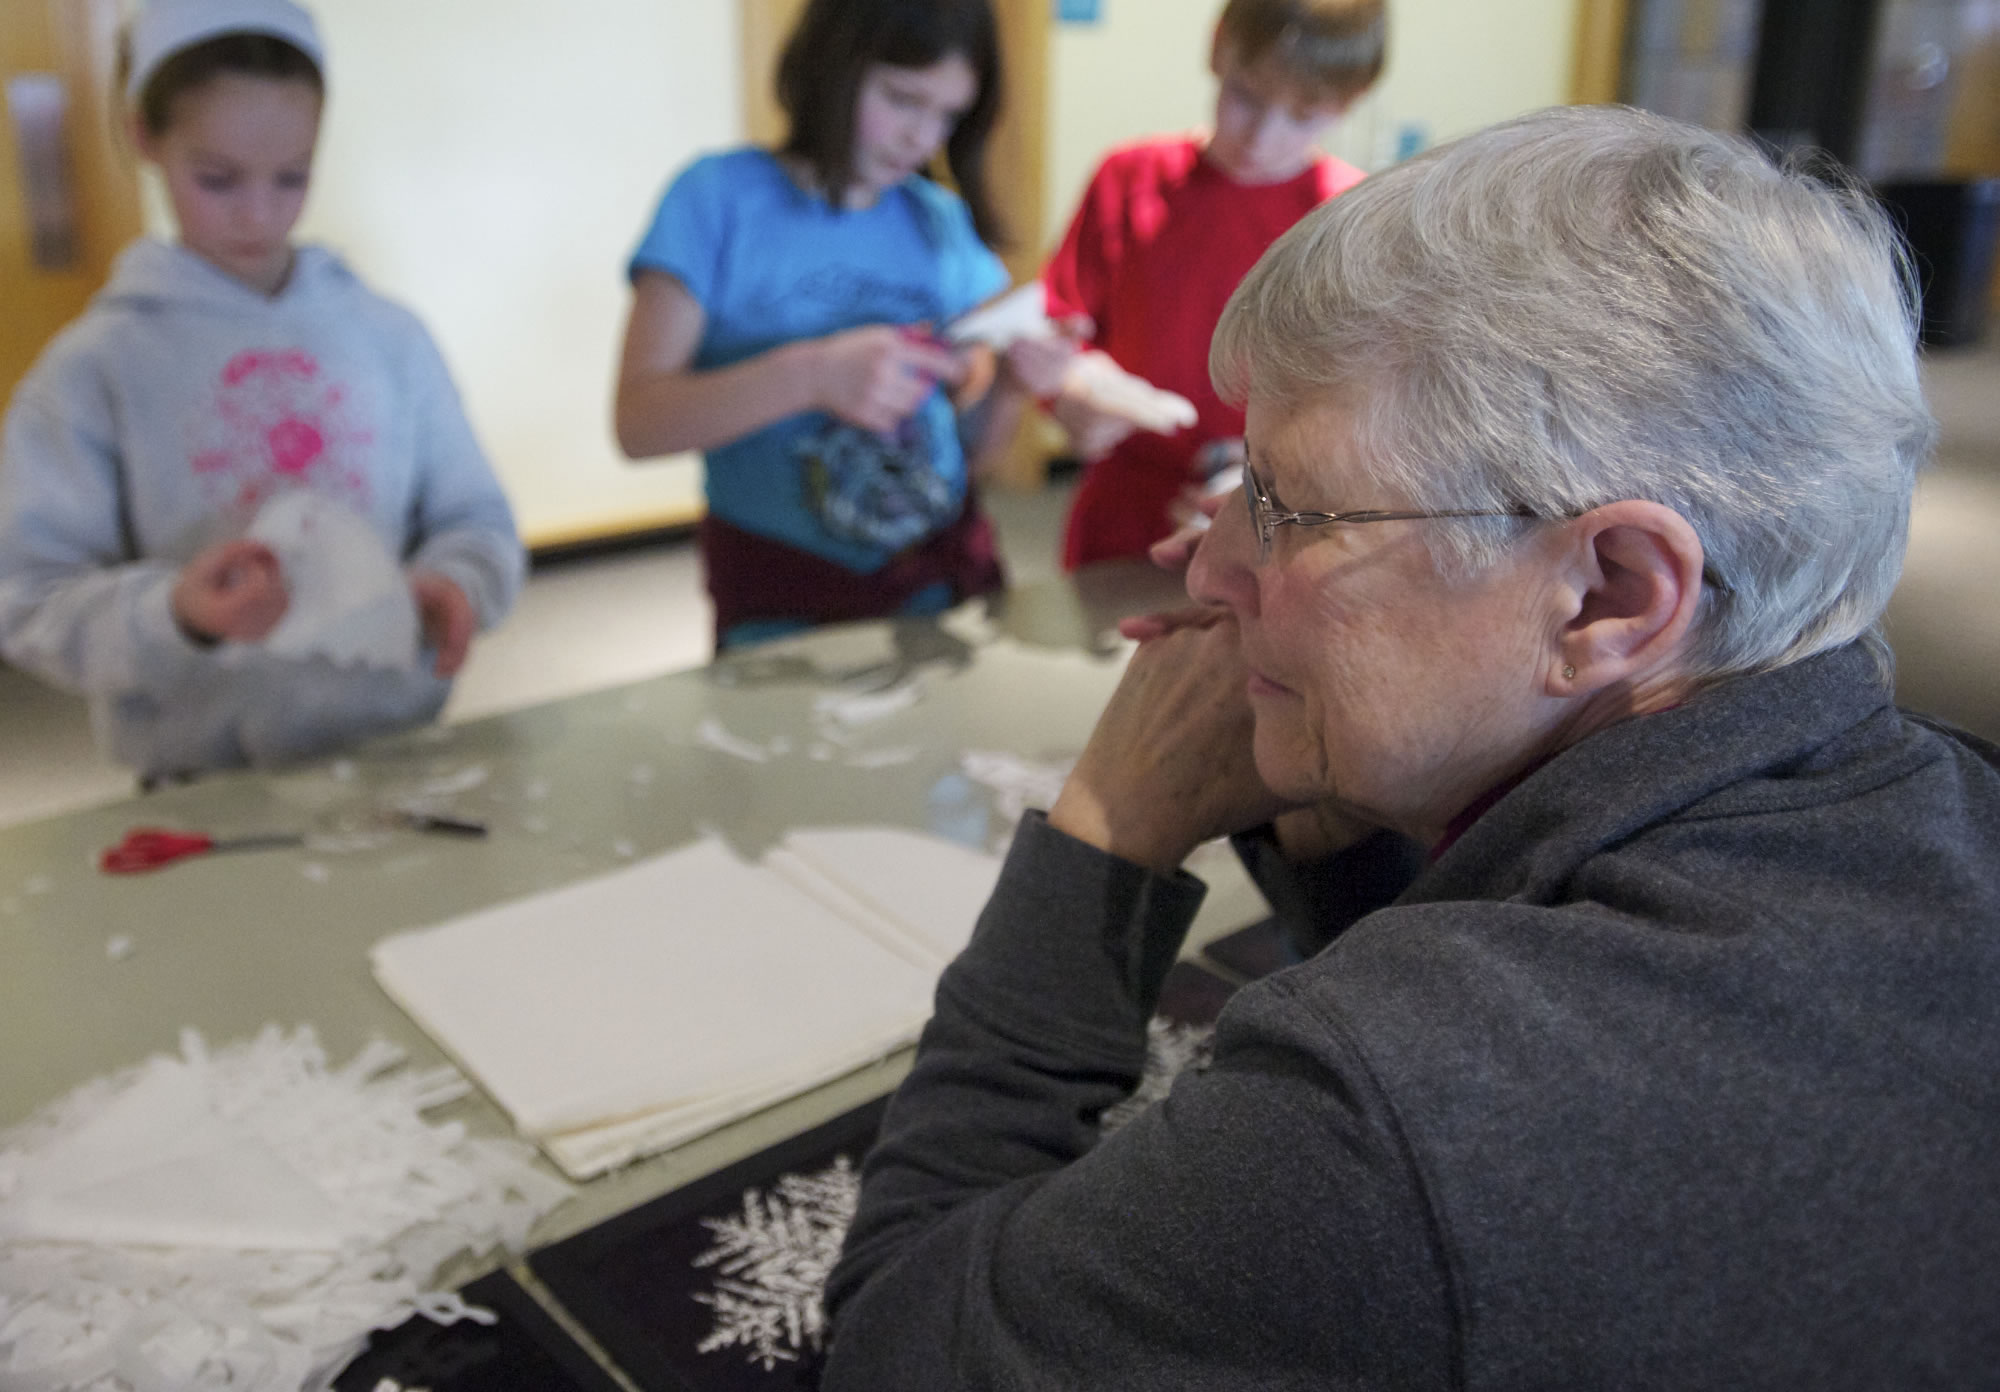 Longtime volunteer Marilyn Feddeler, 75, helps kids make snowflakes out of tissue paper at the Water Resources Education Center's Second Saturday event.